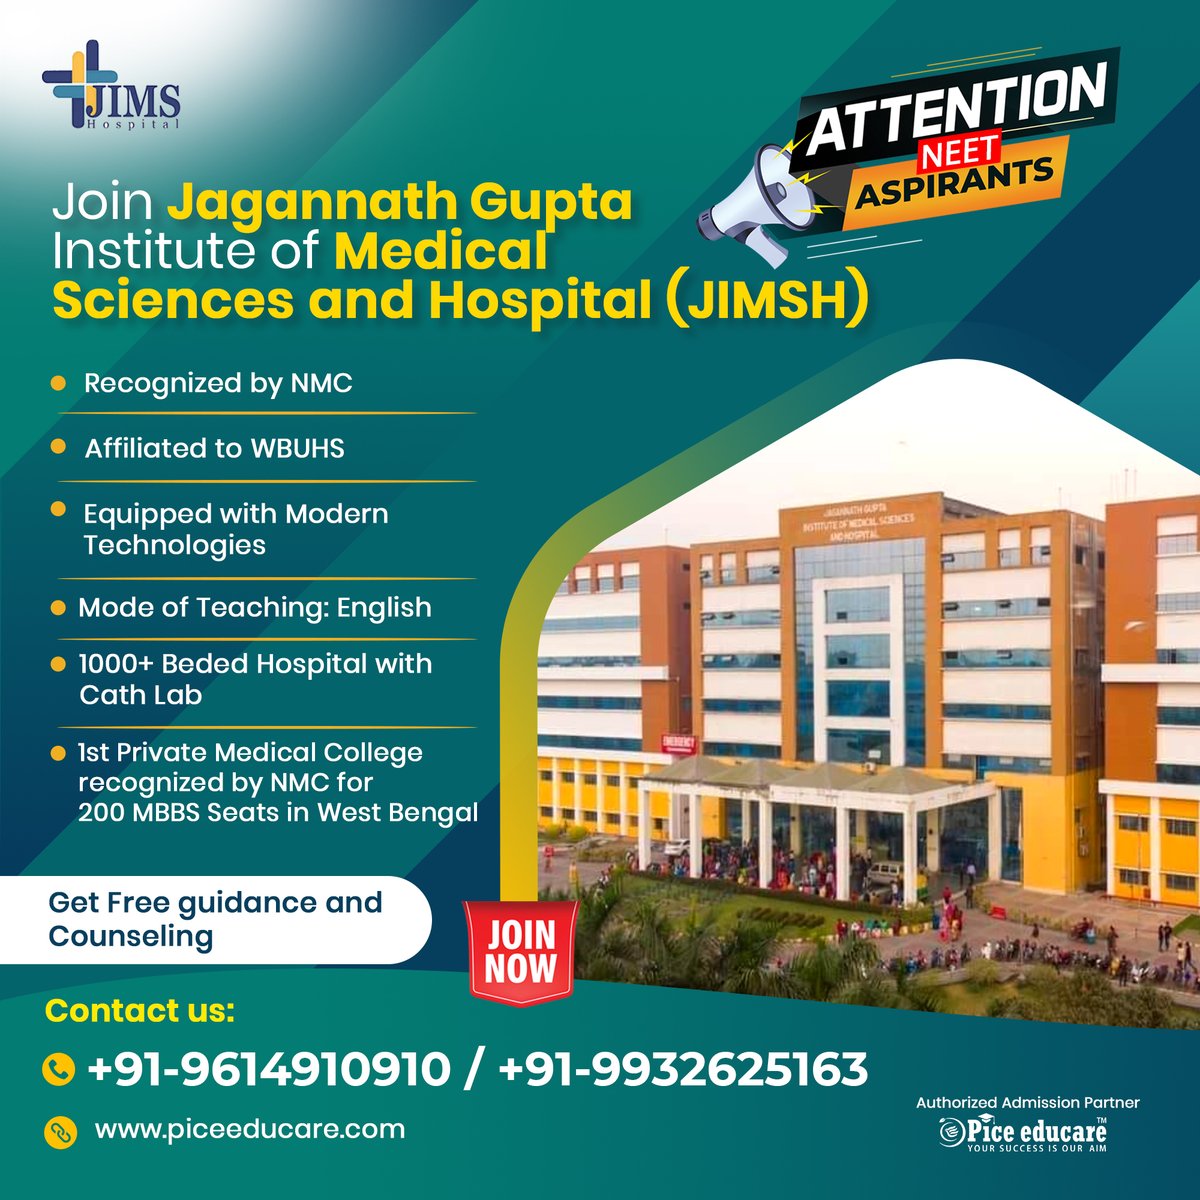 Jagannath Gupta Institute of Medical Sciences & Hospital (JIMSH)
Pre Booking started for the 2024-25 session
Book your MBBS seat now
To get detailed information WhatsApp us at 9614910910 / 9932625163
.
.
.
#mbbsadmission #mbbs #mbbscollegeinindia #JIMSH #medicaladmission2024